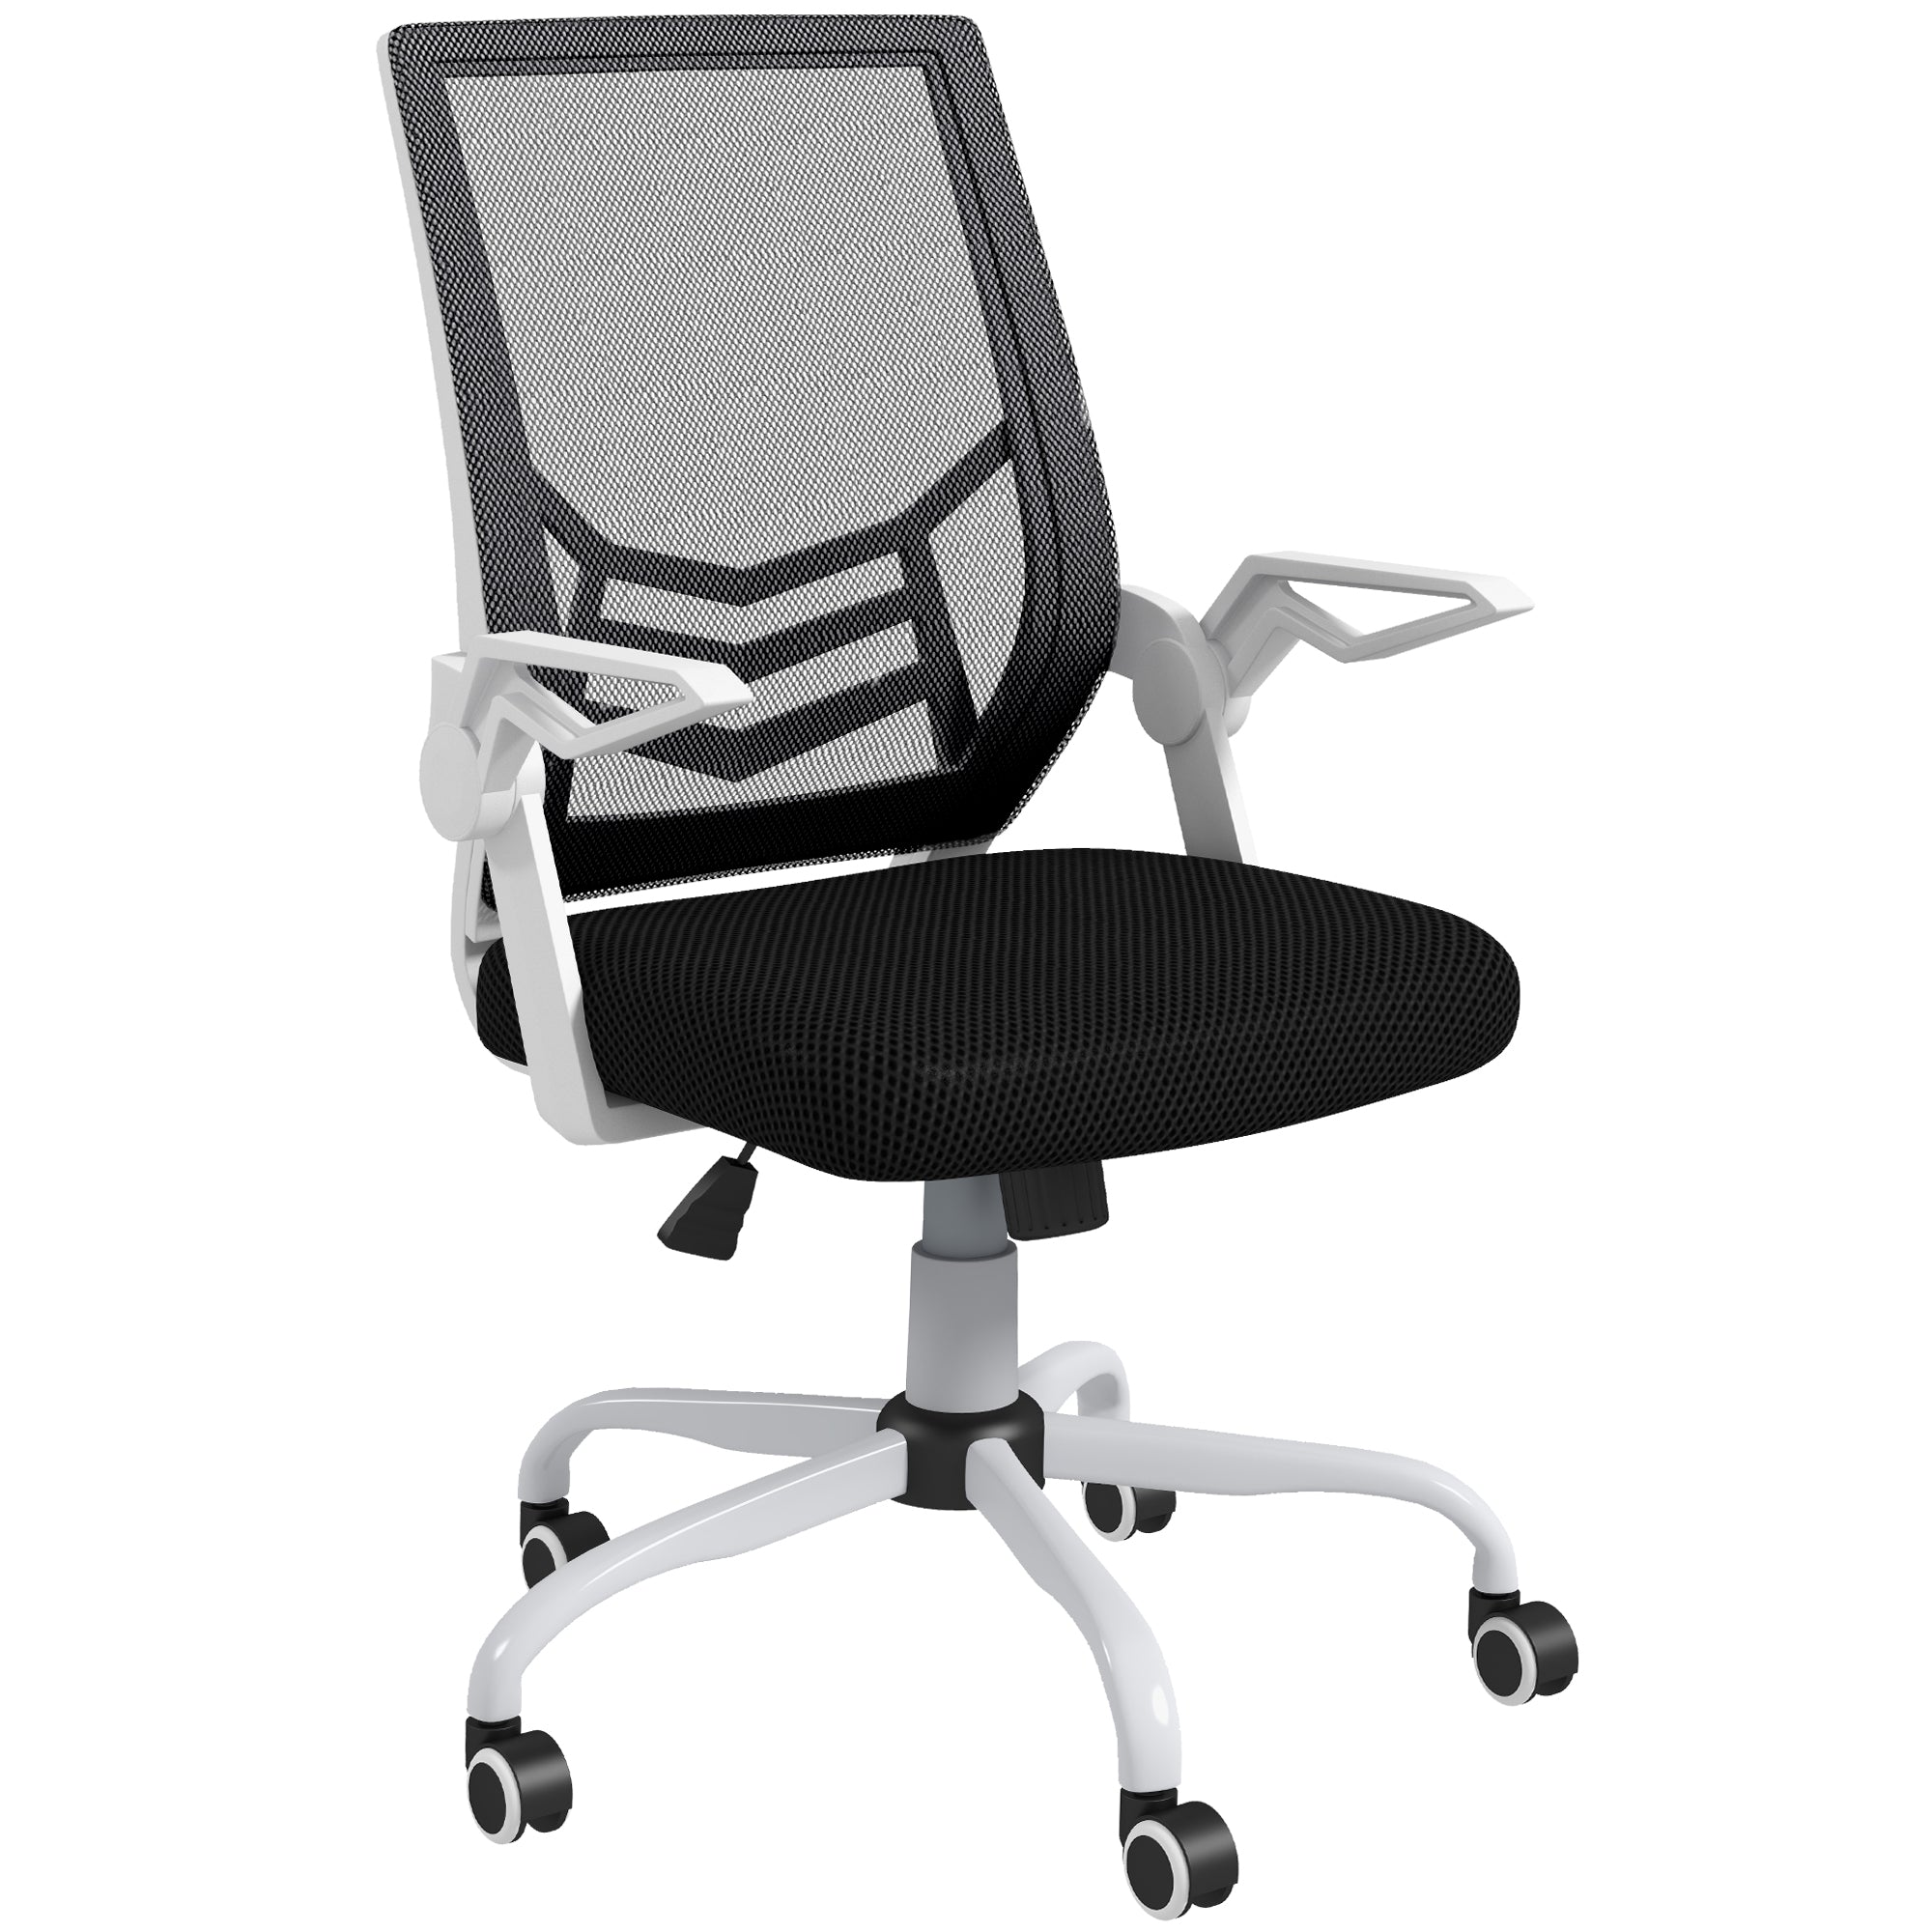 Mesh Office Chair, Computer Desk Chair with Flip-up Armrests, Lumbar Back Support and Swivel Wheels, Black-0